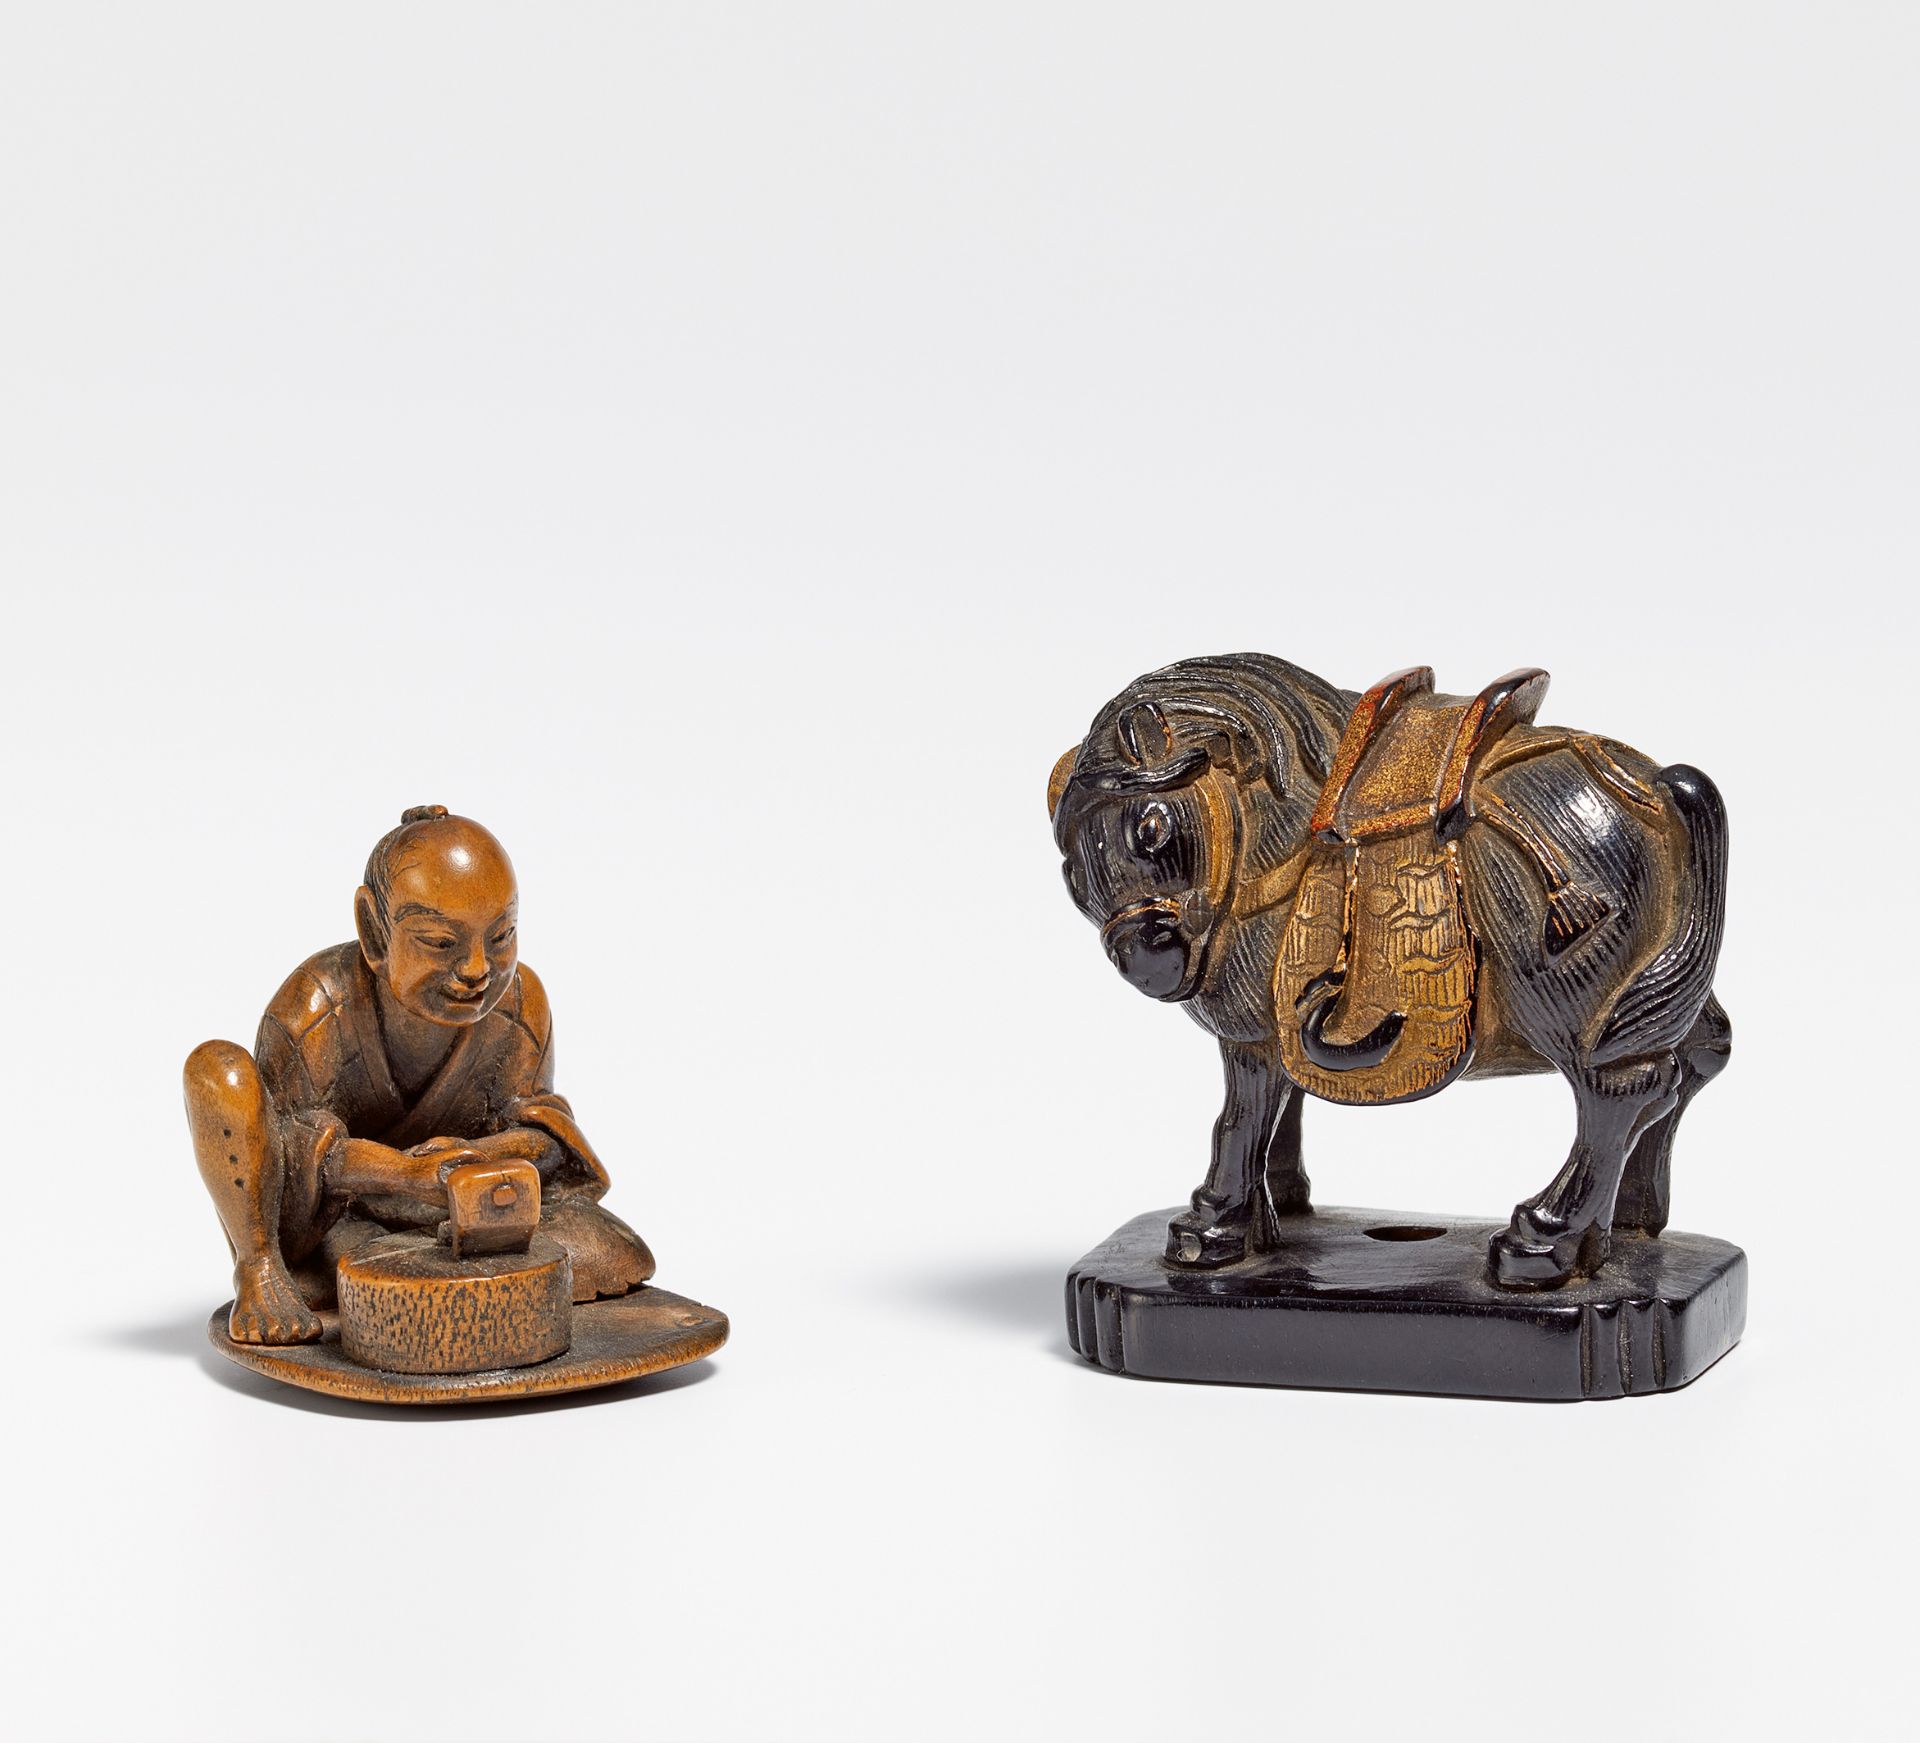 ZWEI NETSUKE: STONE MASON AND HORSE. Japan. 19th c. Wood, carved, at the horse black, red and gold